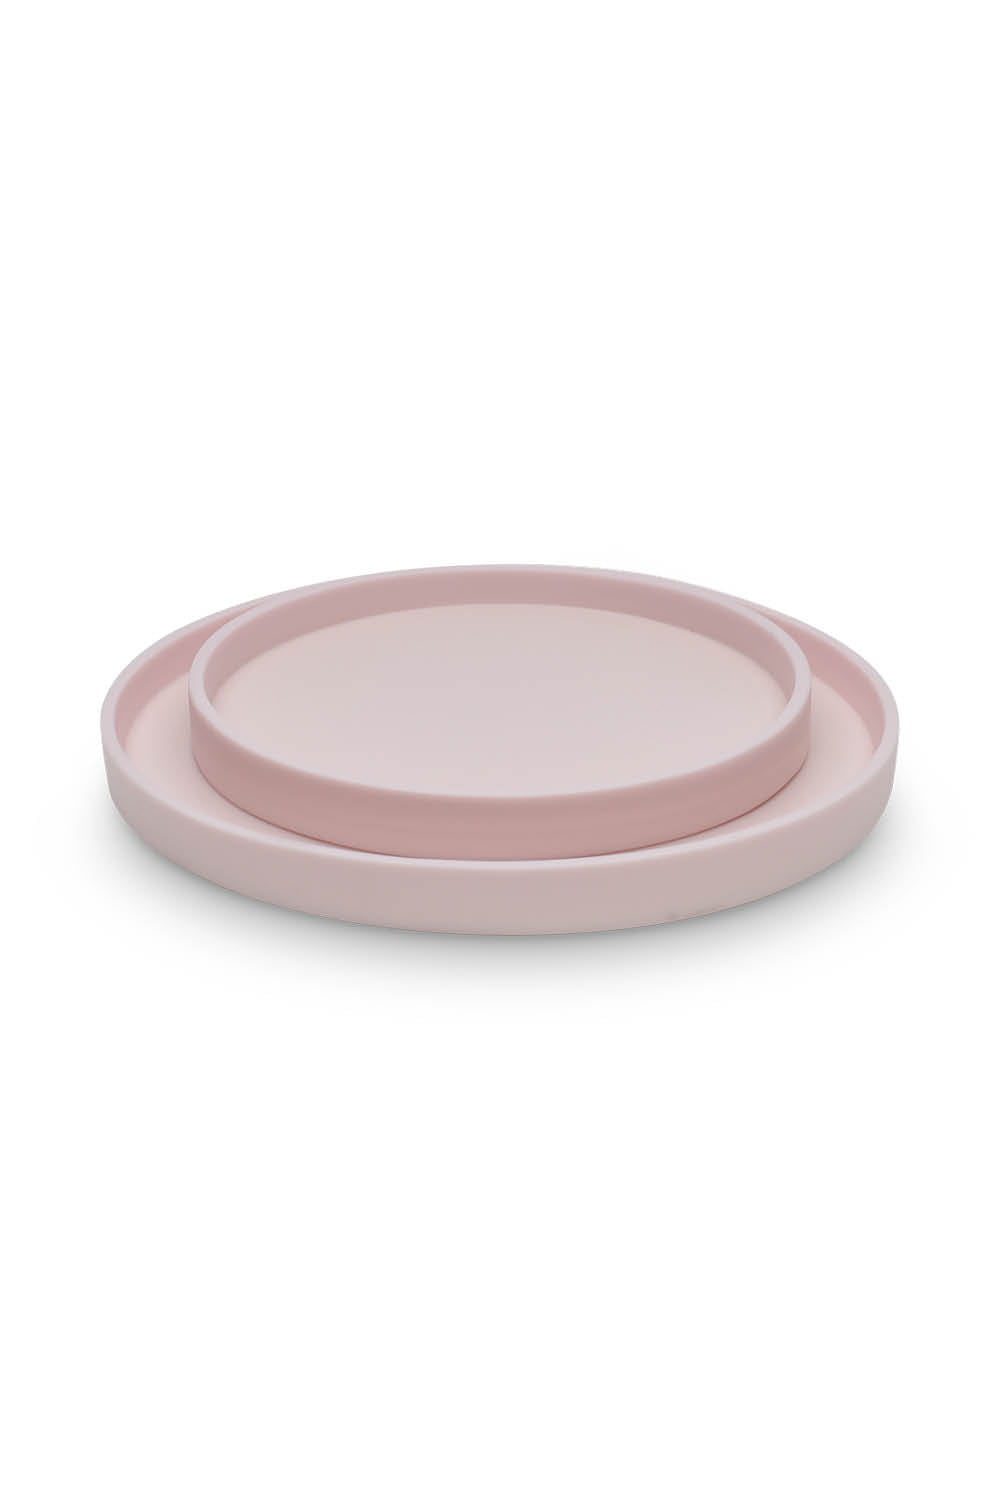 HALO Large Tray in Pale Rose